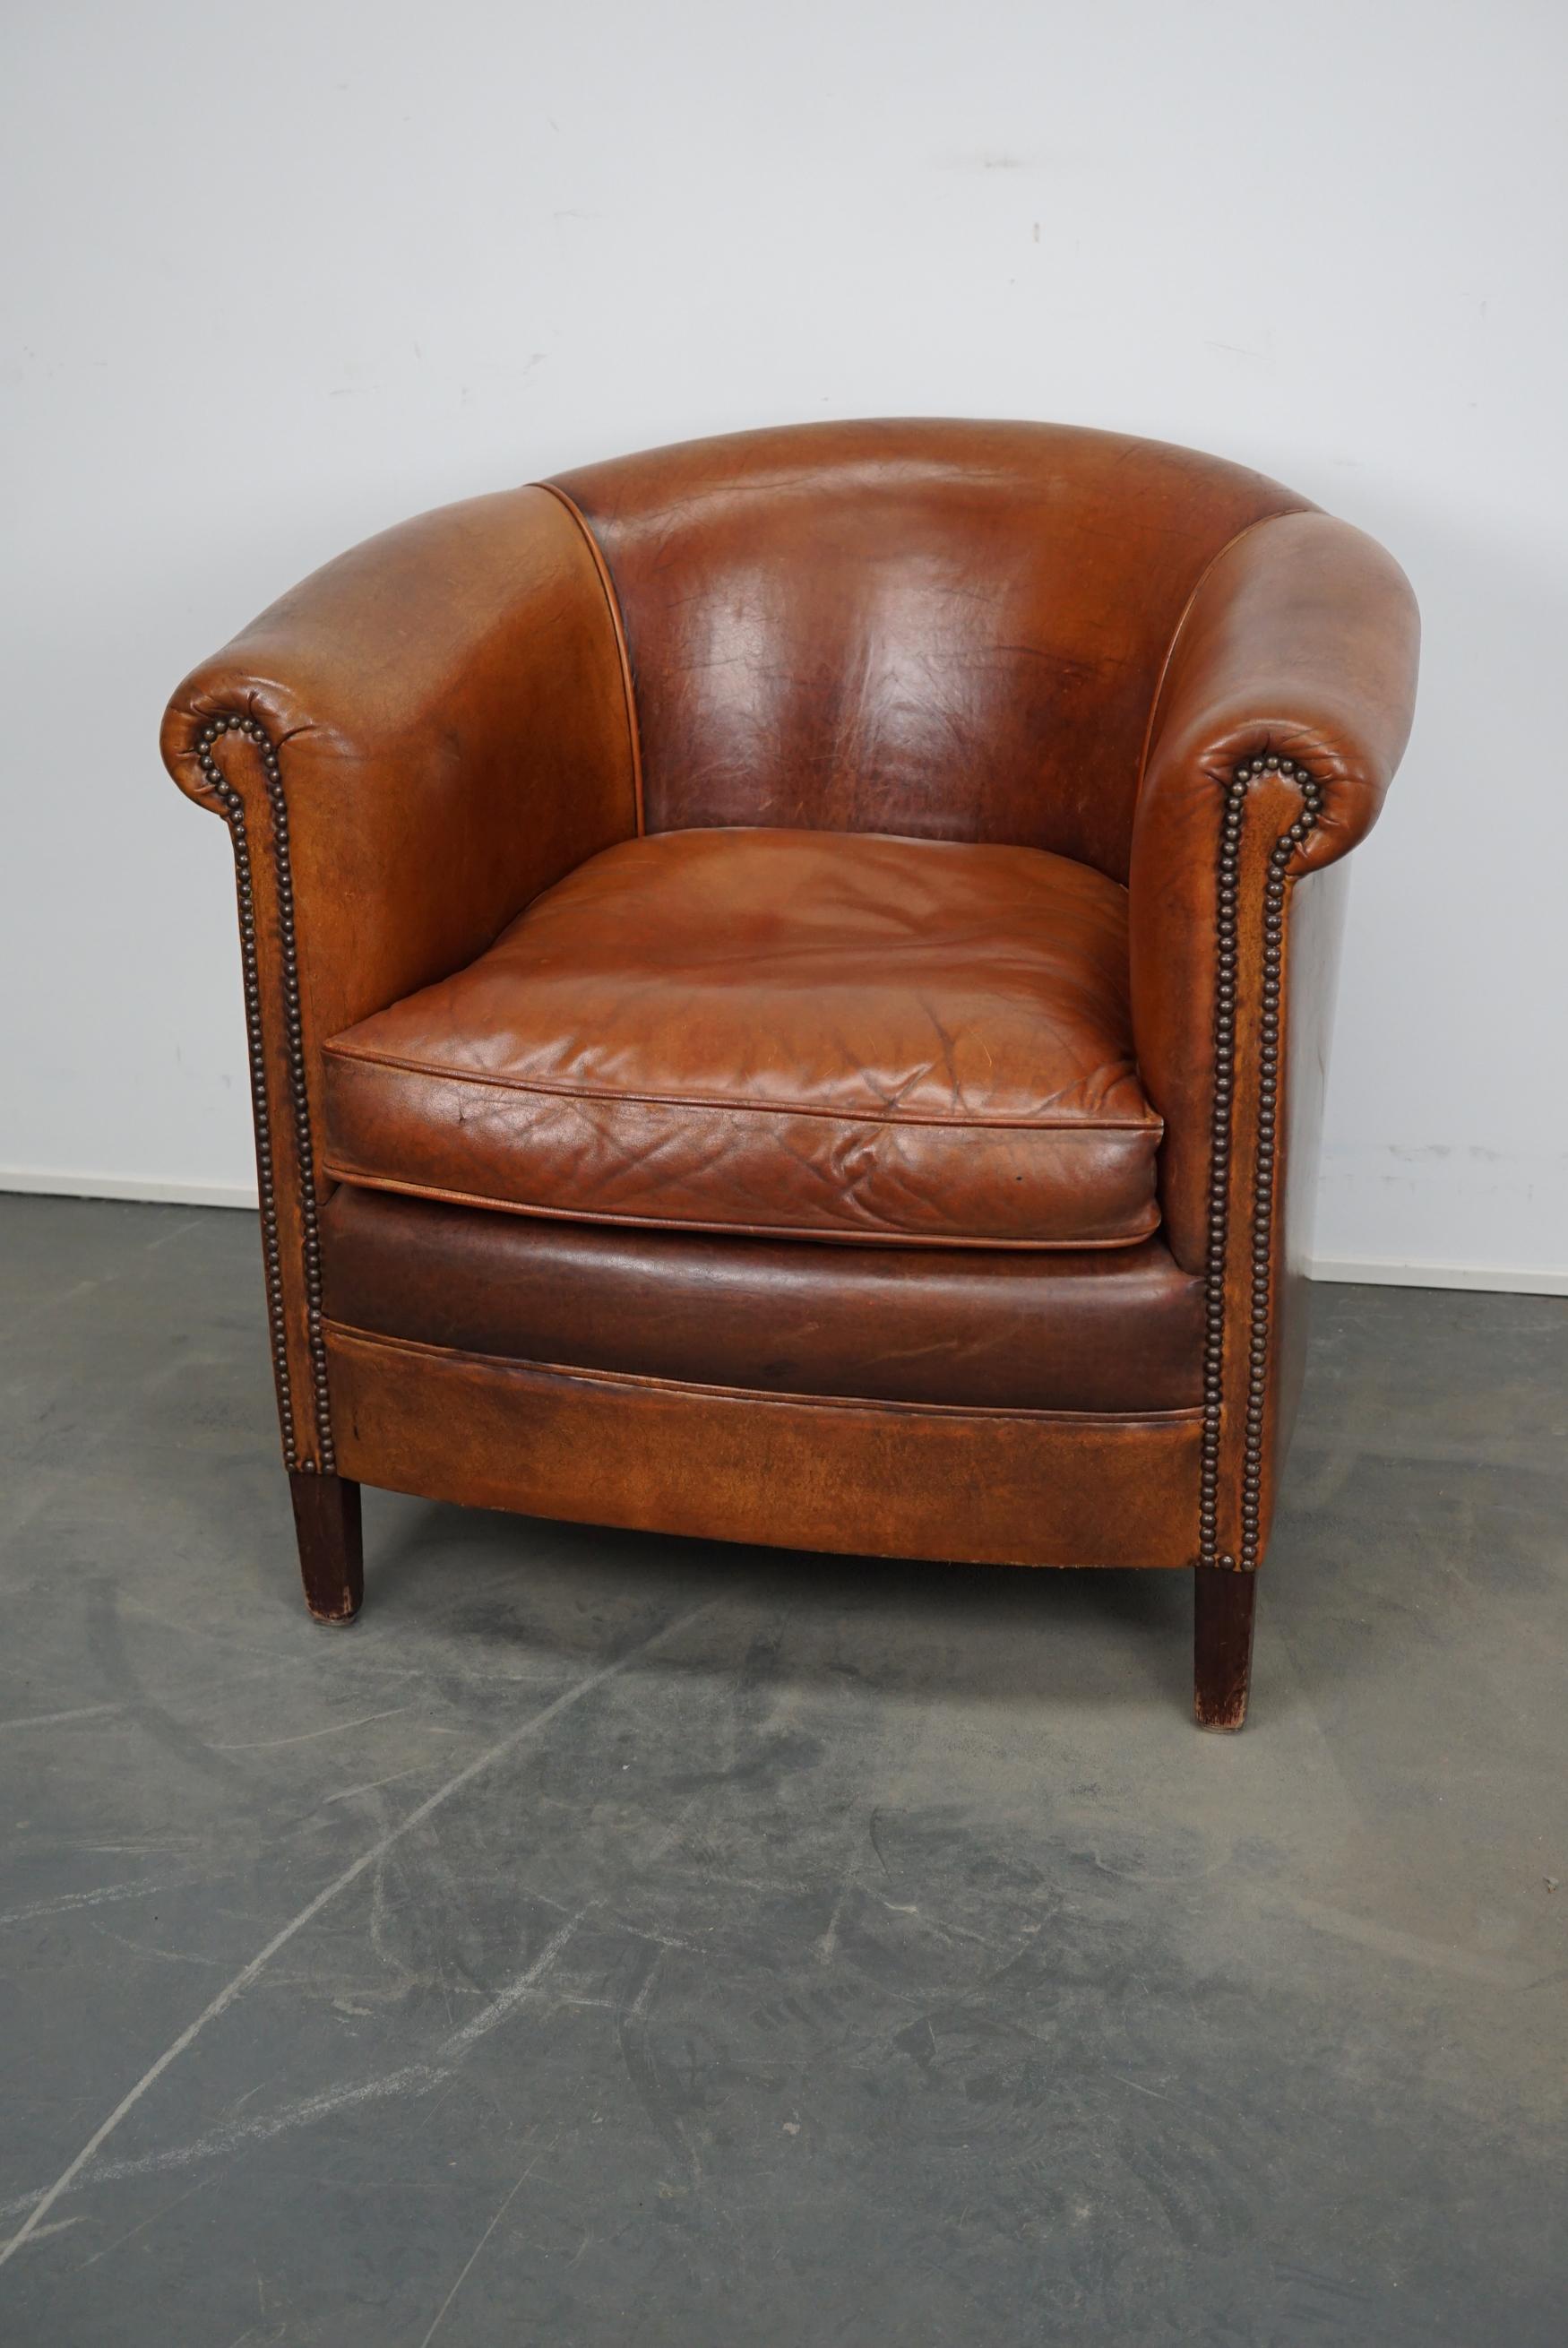 This vintage cognac-colored leather club chair comes from the Netherlands. It is upholstered with cognac-colored leather and features metal rivets and wooden legs.